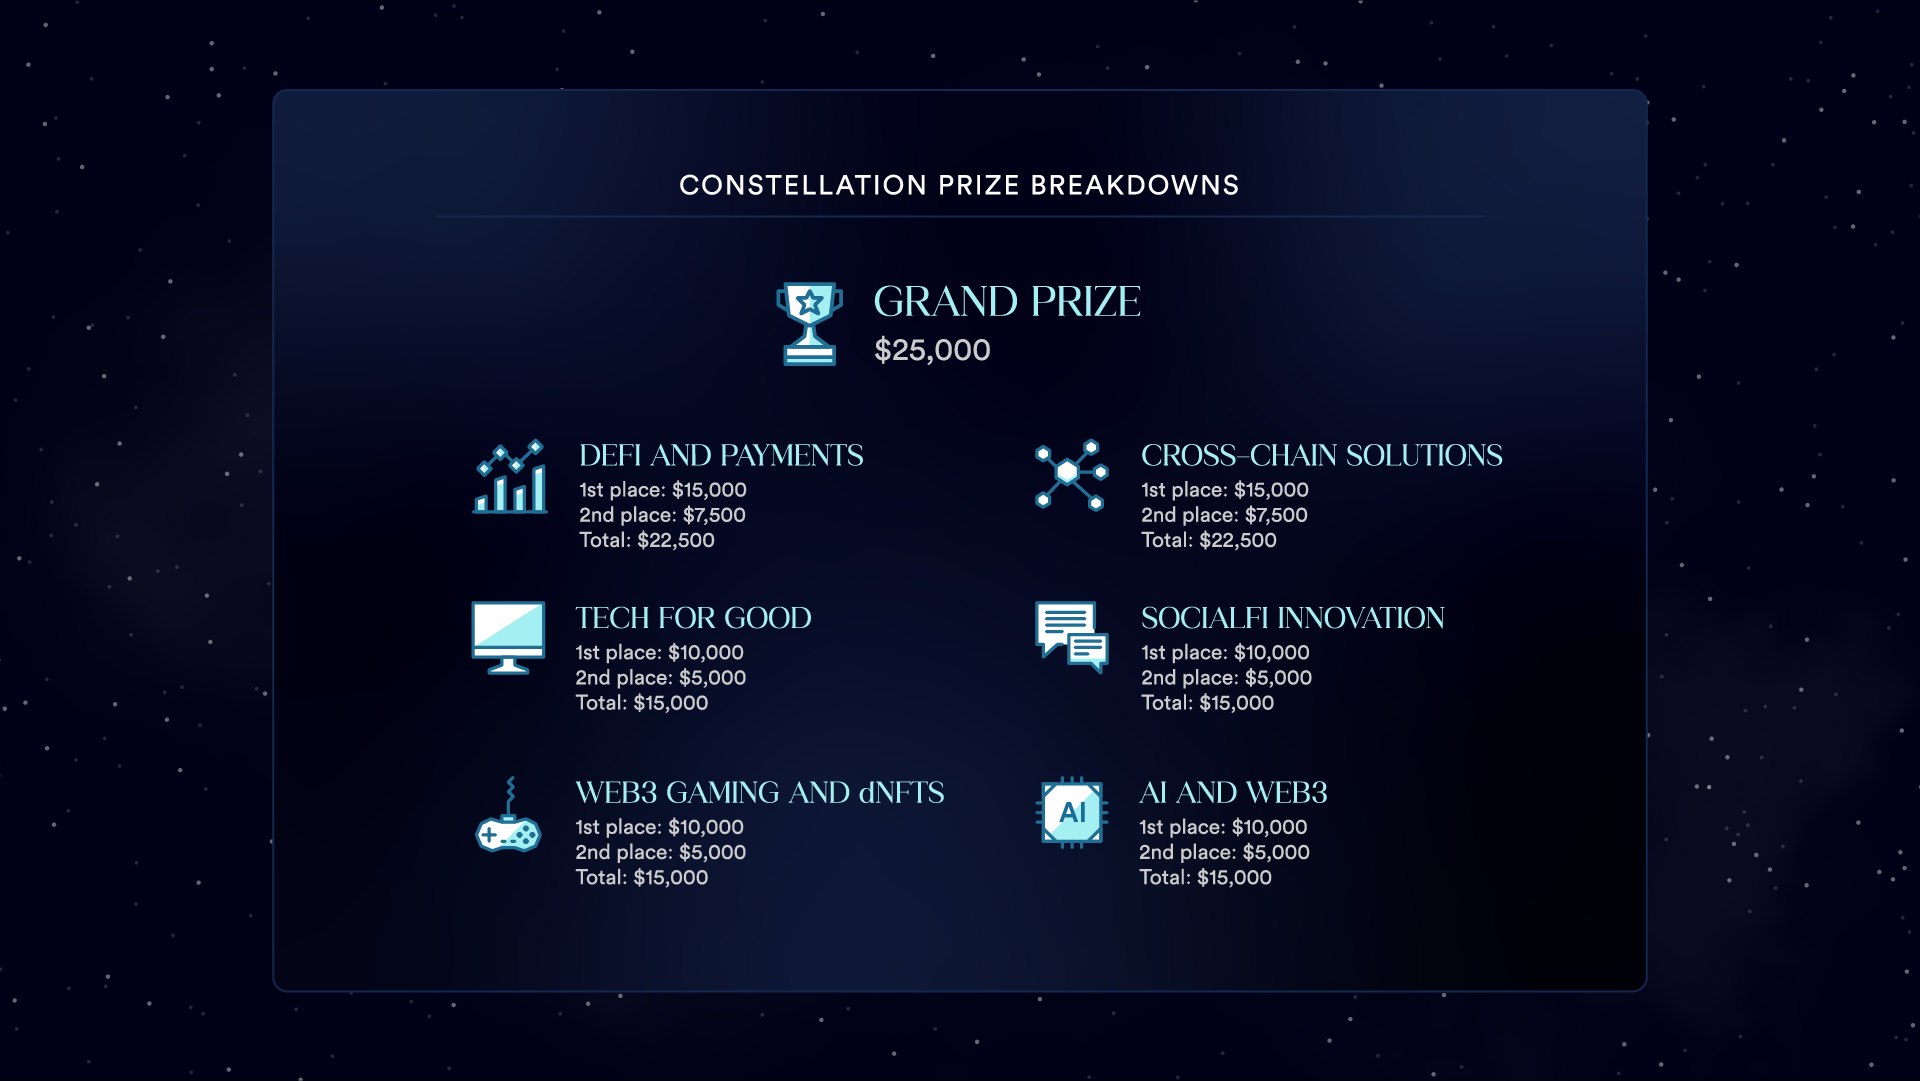 A banner breaking down the core Constellation prizes.